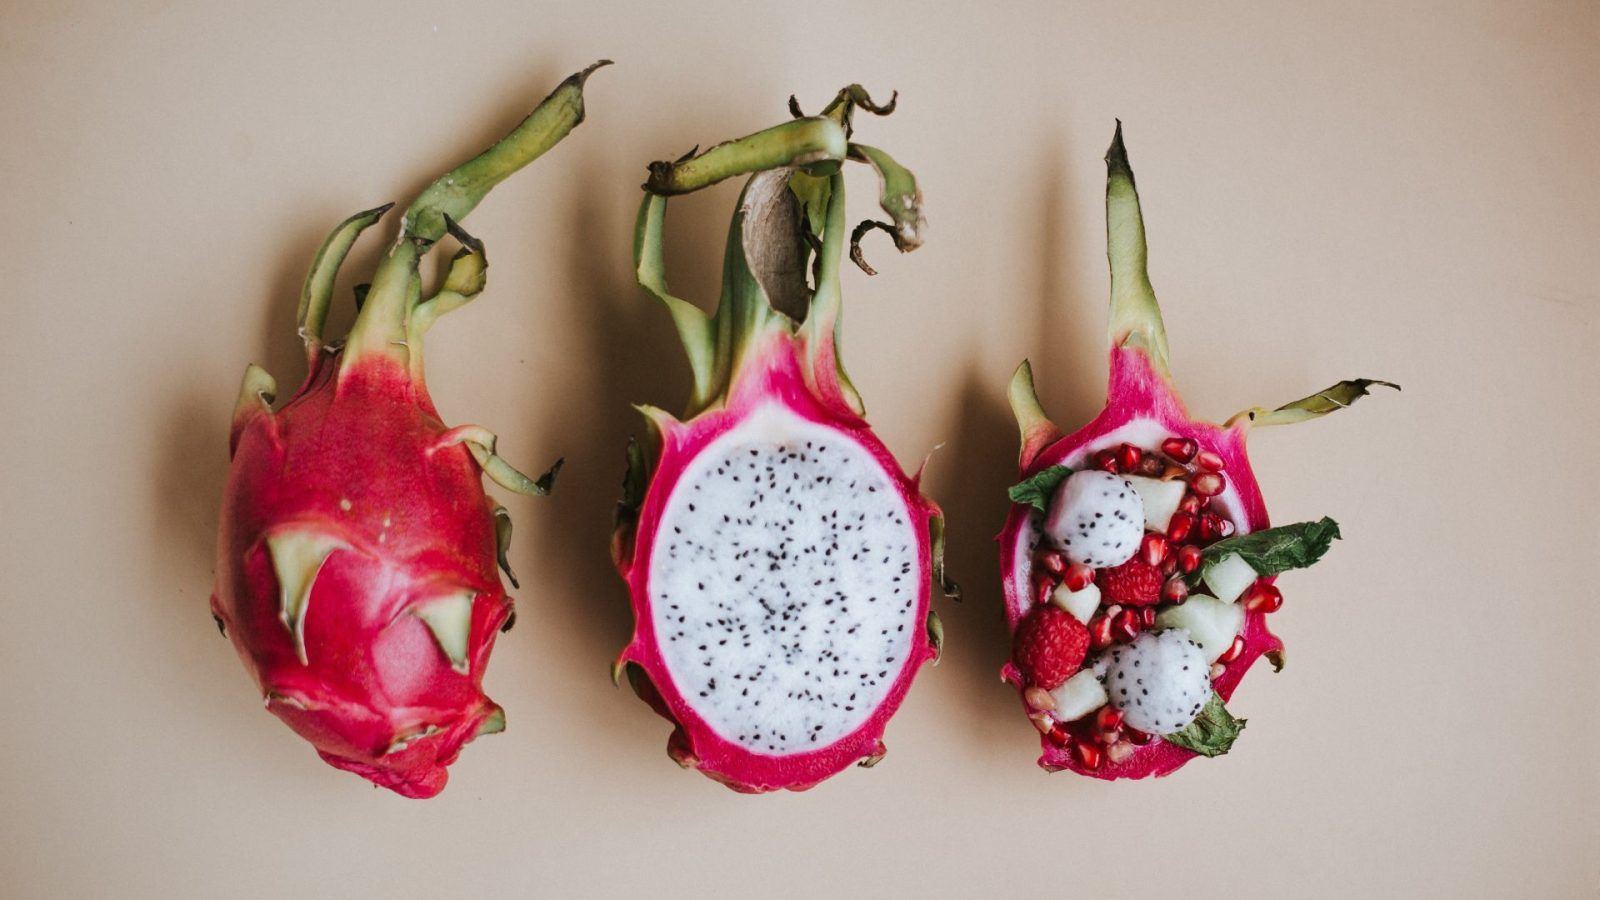 red dragon fruit how to eat